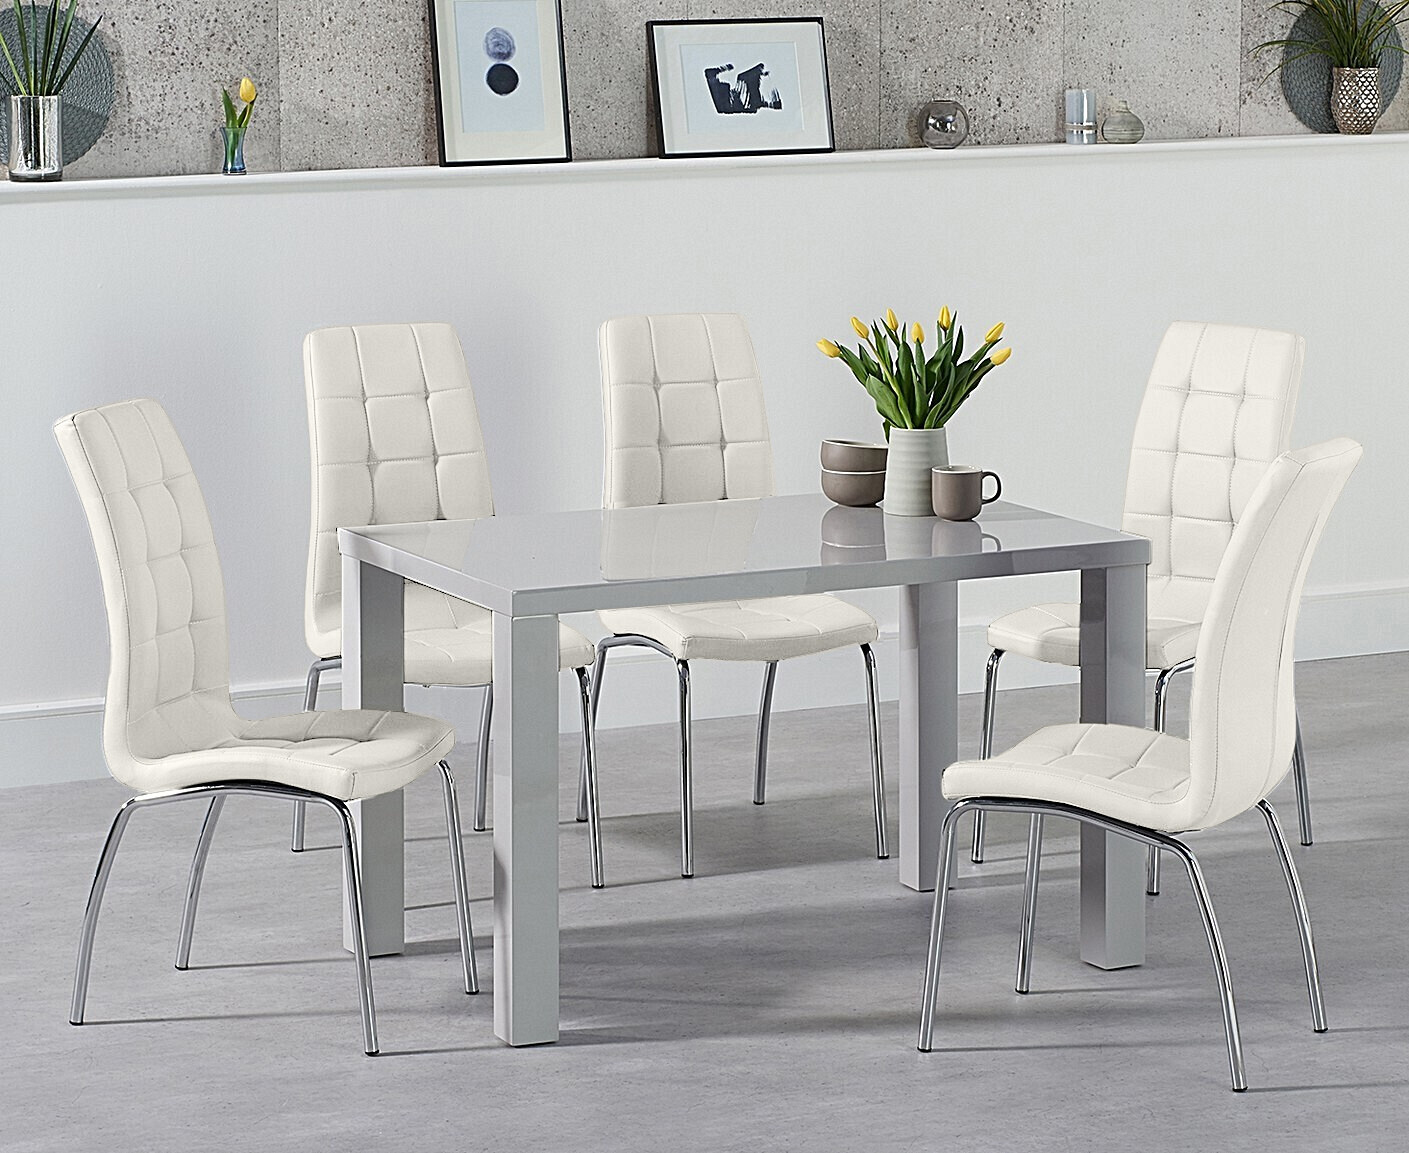 Photo 2 of Seattle 120cm light grey high gloss dining table with 6 black enzo chairs